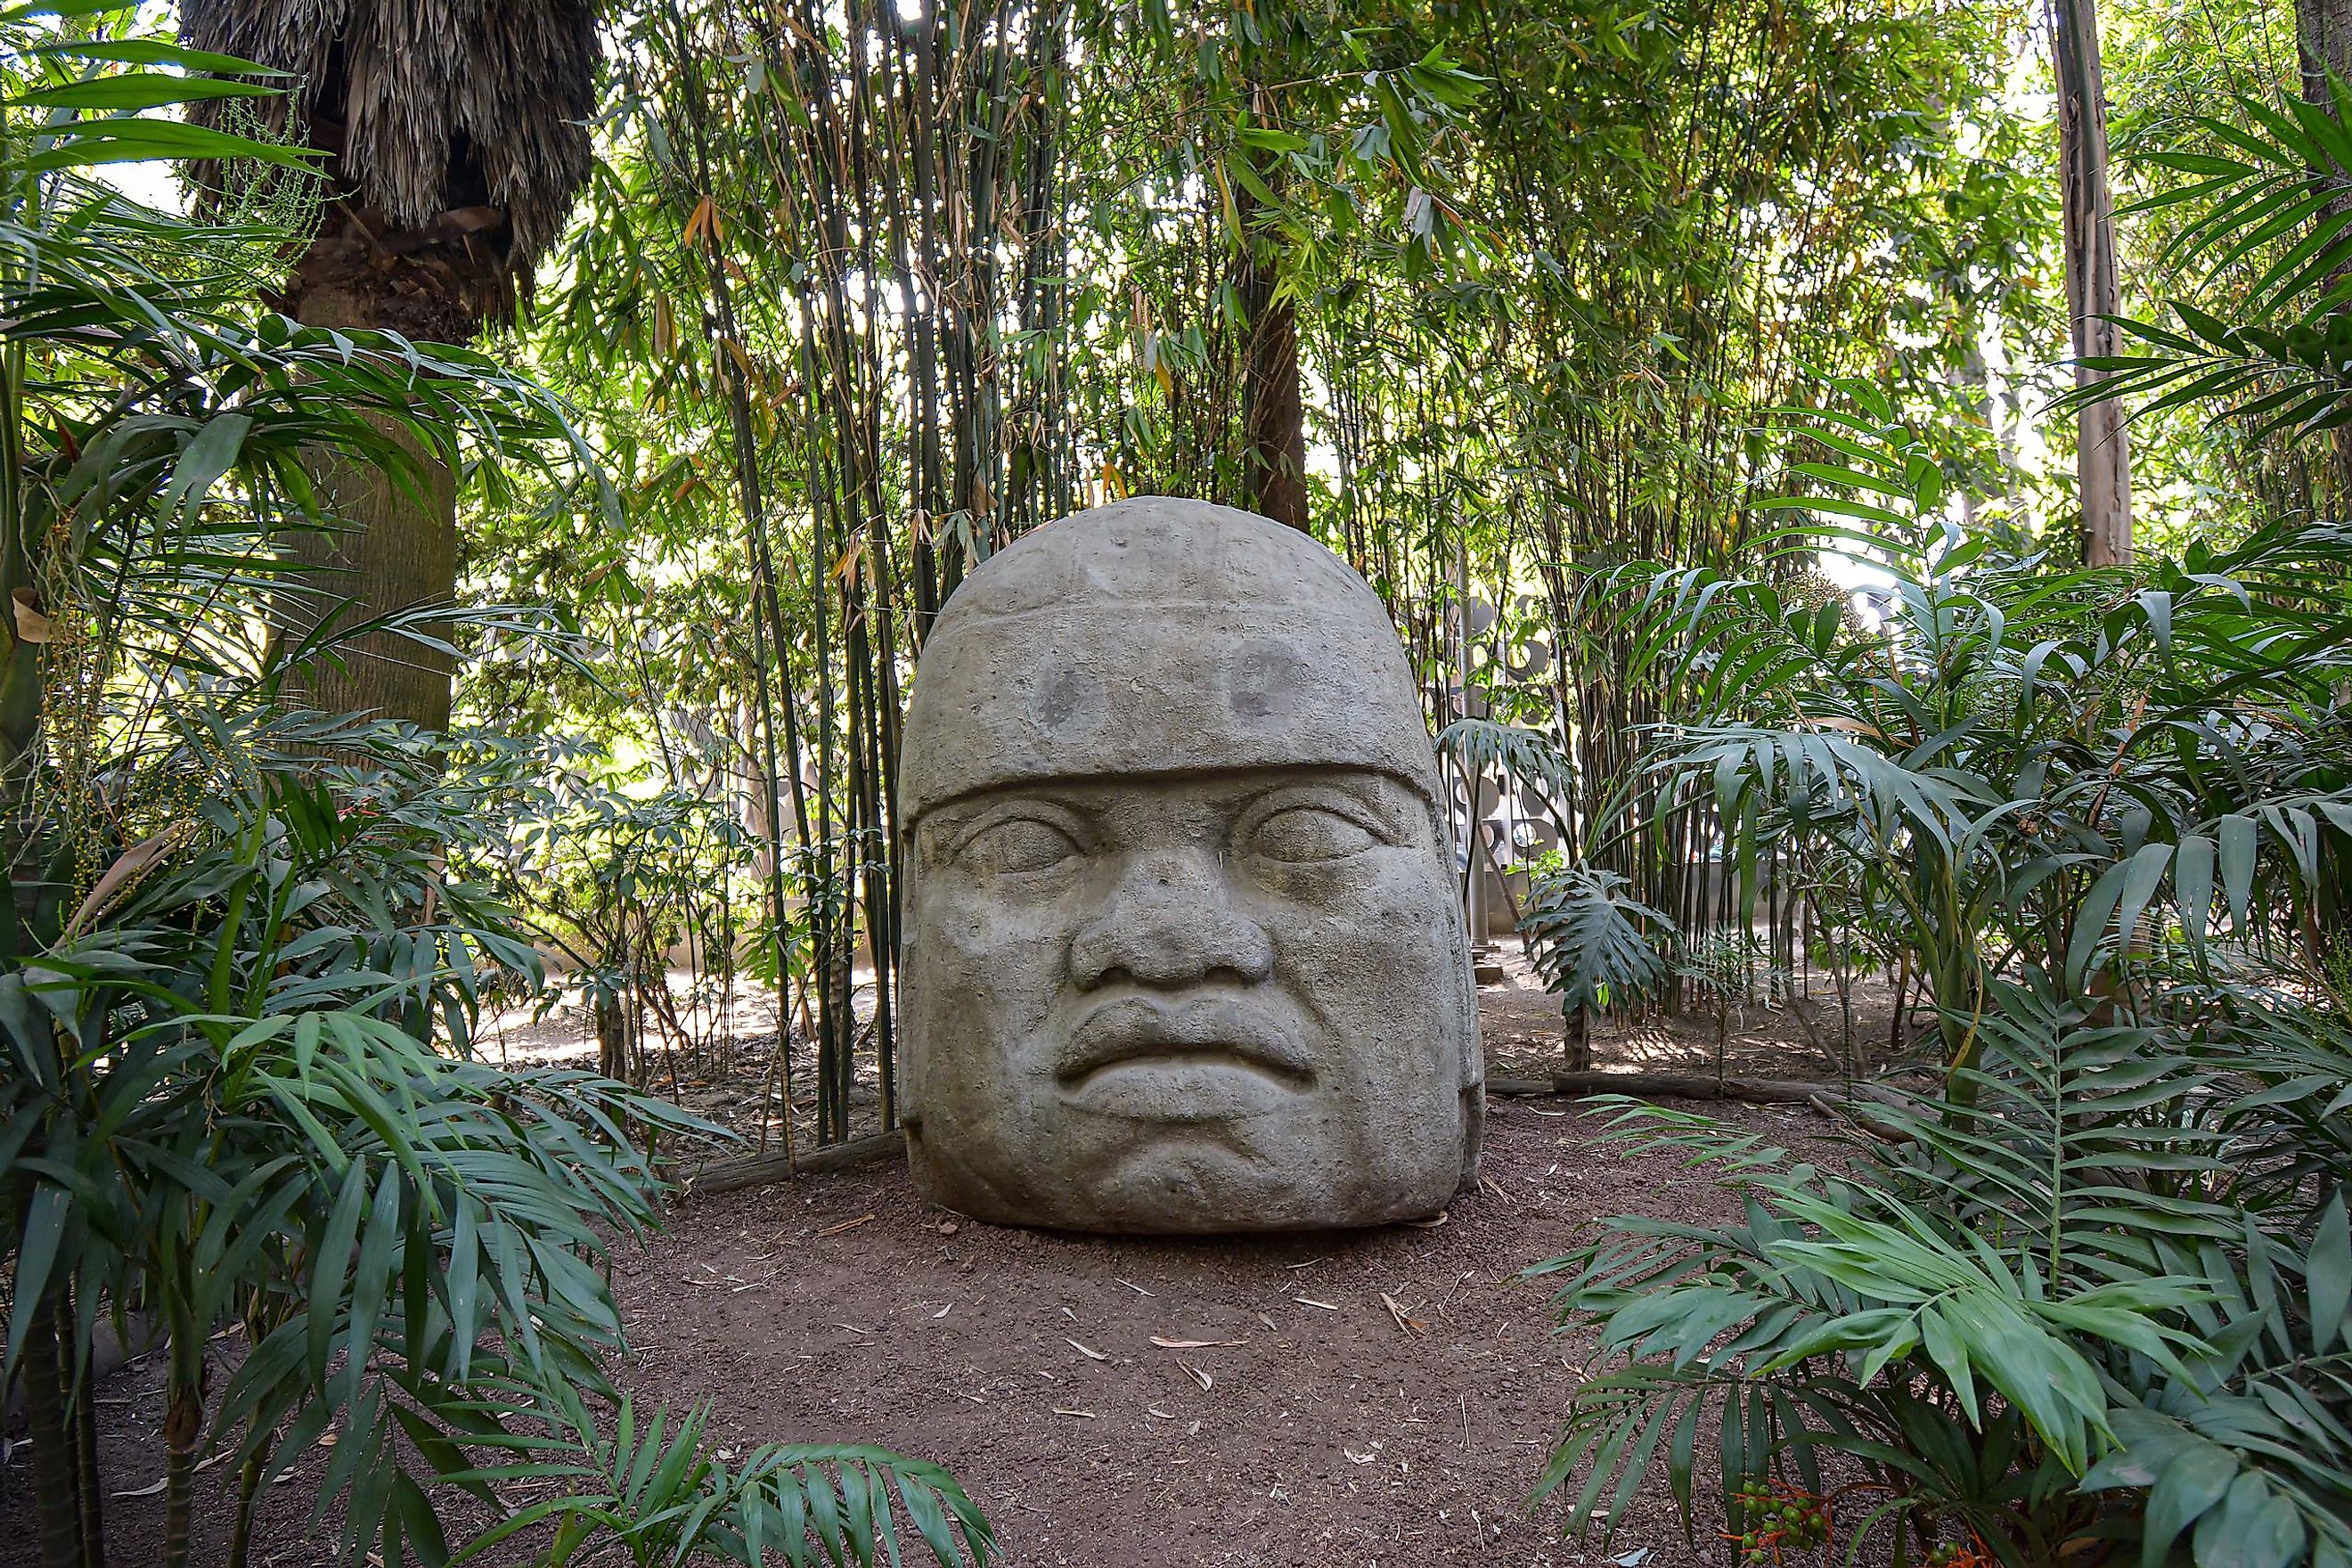 The outdoor museum of Parque Museo La Venta in Tabasco, Mexico, showcases ancient Olmec heads and other basalt carvings.Editorial credit: JC Gonram / Shutterstock.com